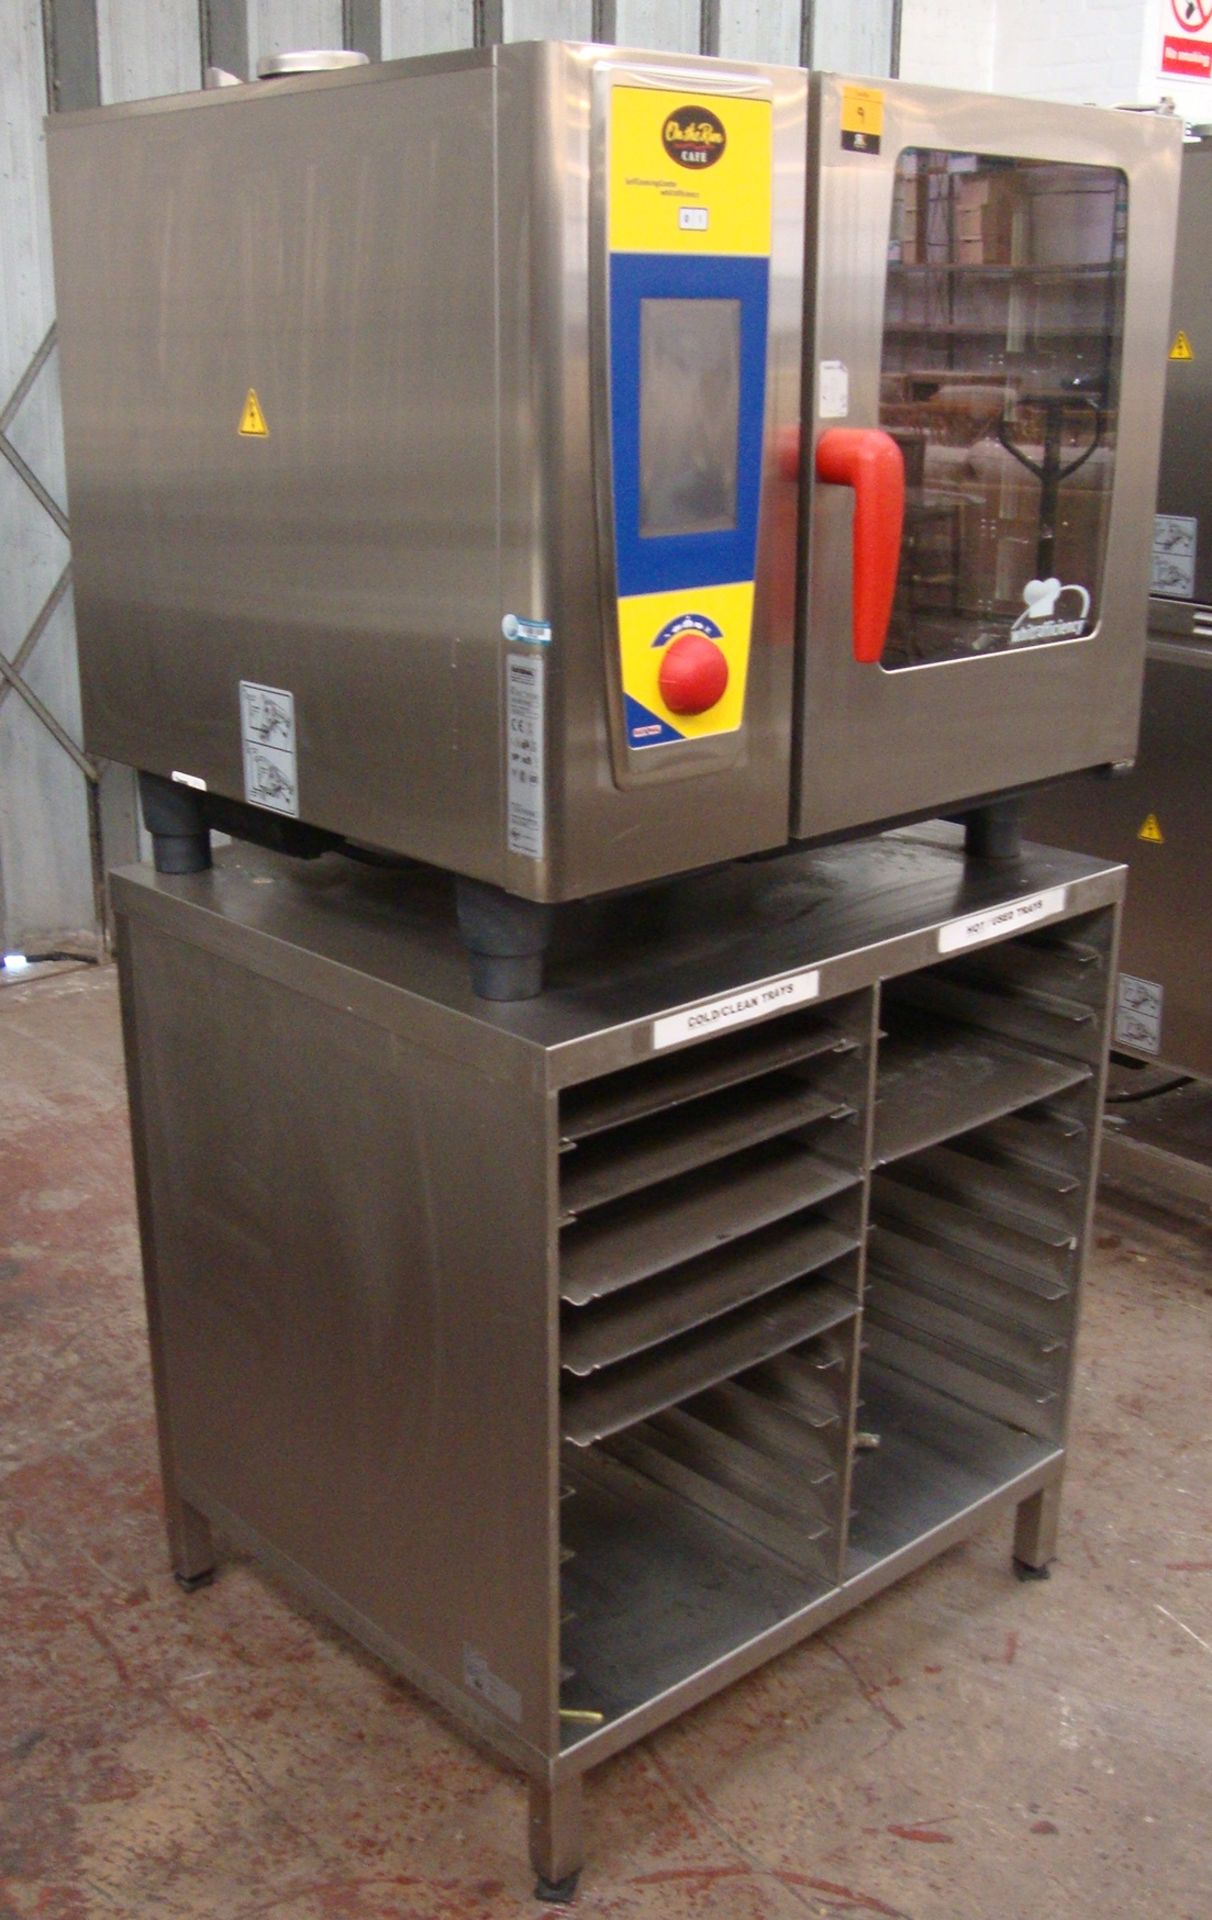 2013 Rational model SCCWE61 stainless steel SelfCookingCenter whiteefficiency stainless steel - Image 3 of 22